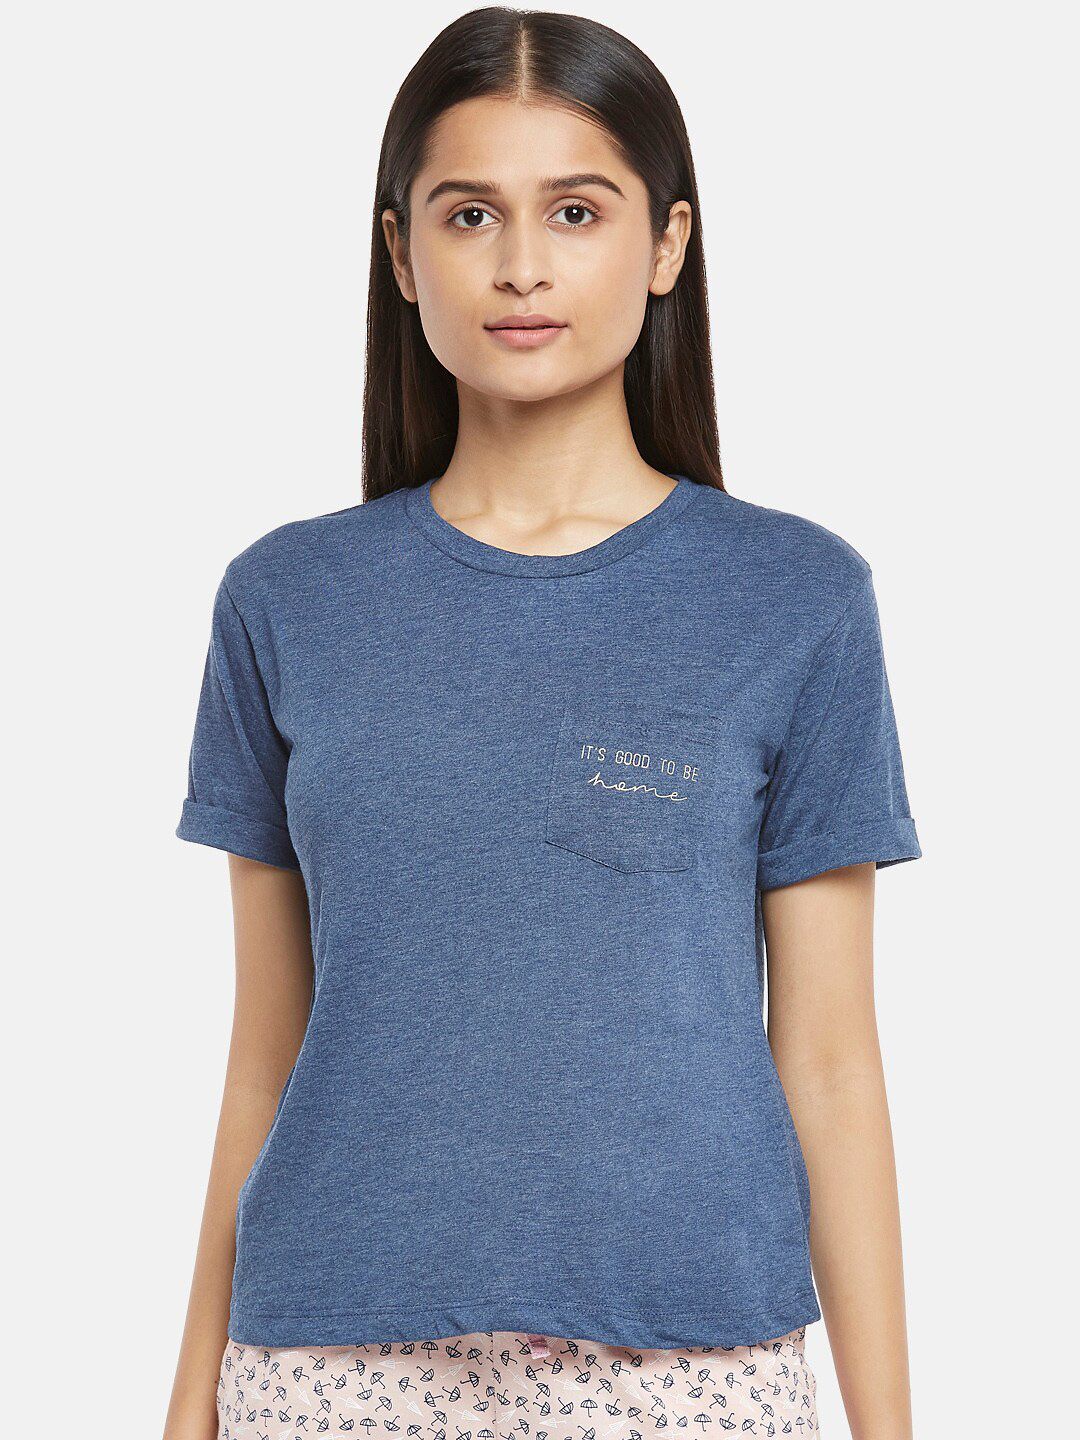 Dreamz by Pantaloons Navy Blue Lounge tshirt Price in India